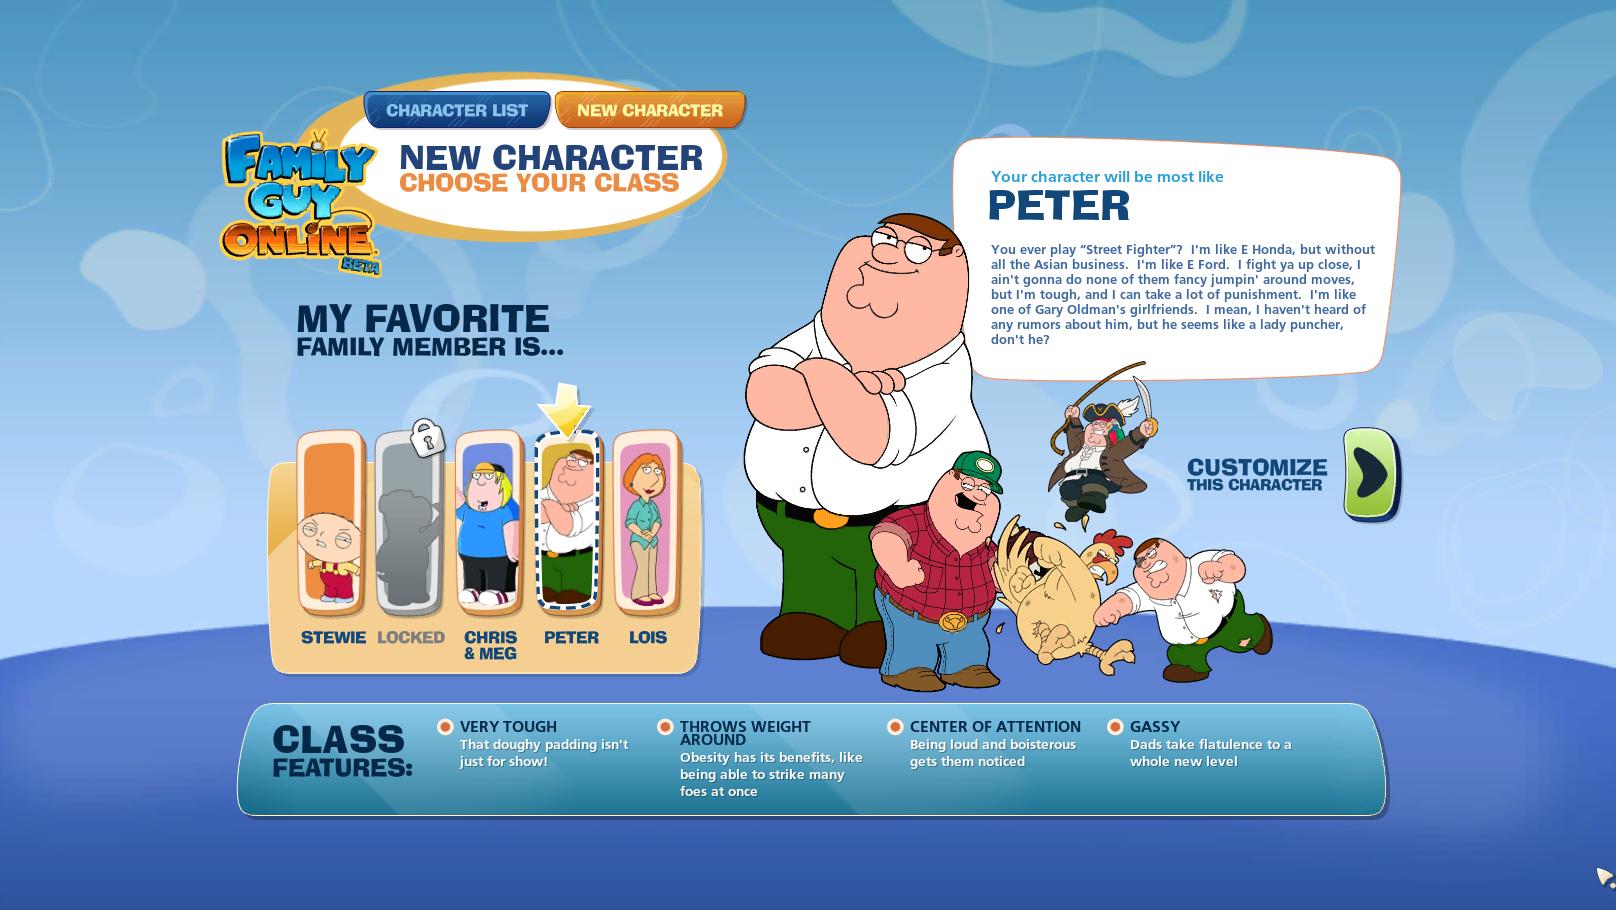 MMOstly Good: Family Guy Online Beta First Impressions, or “This